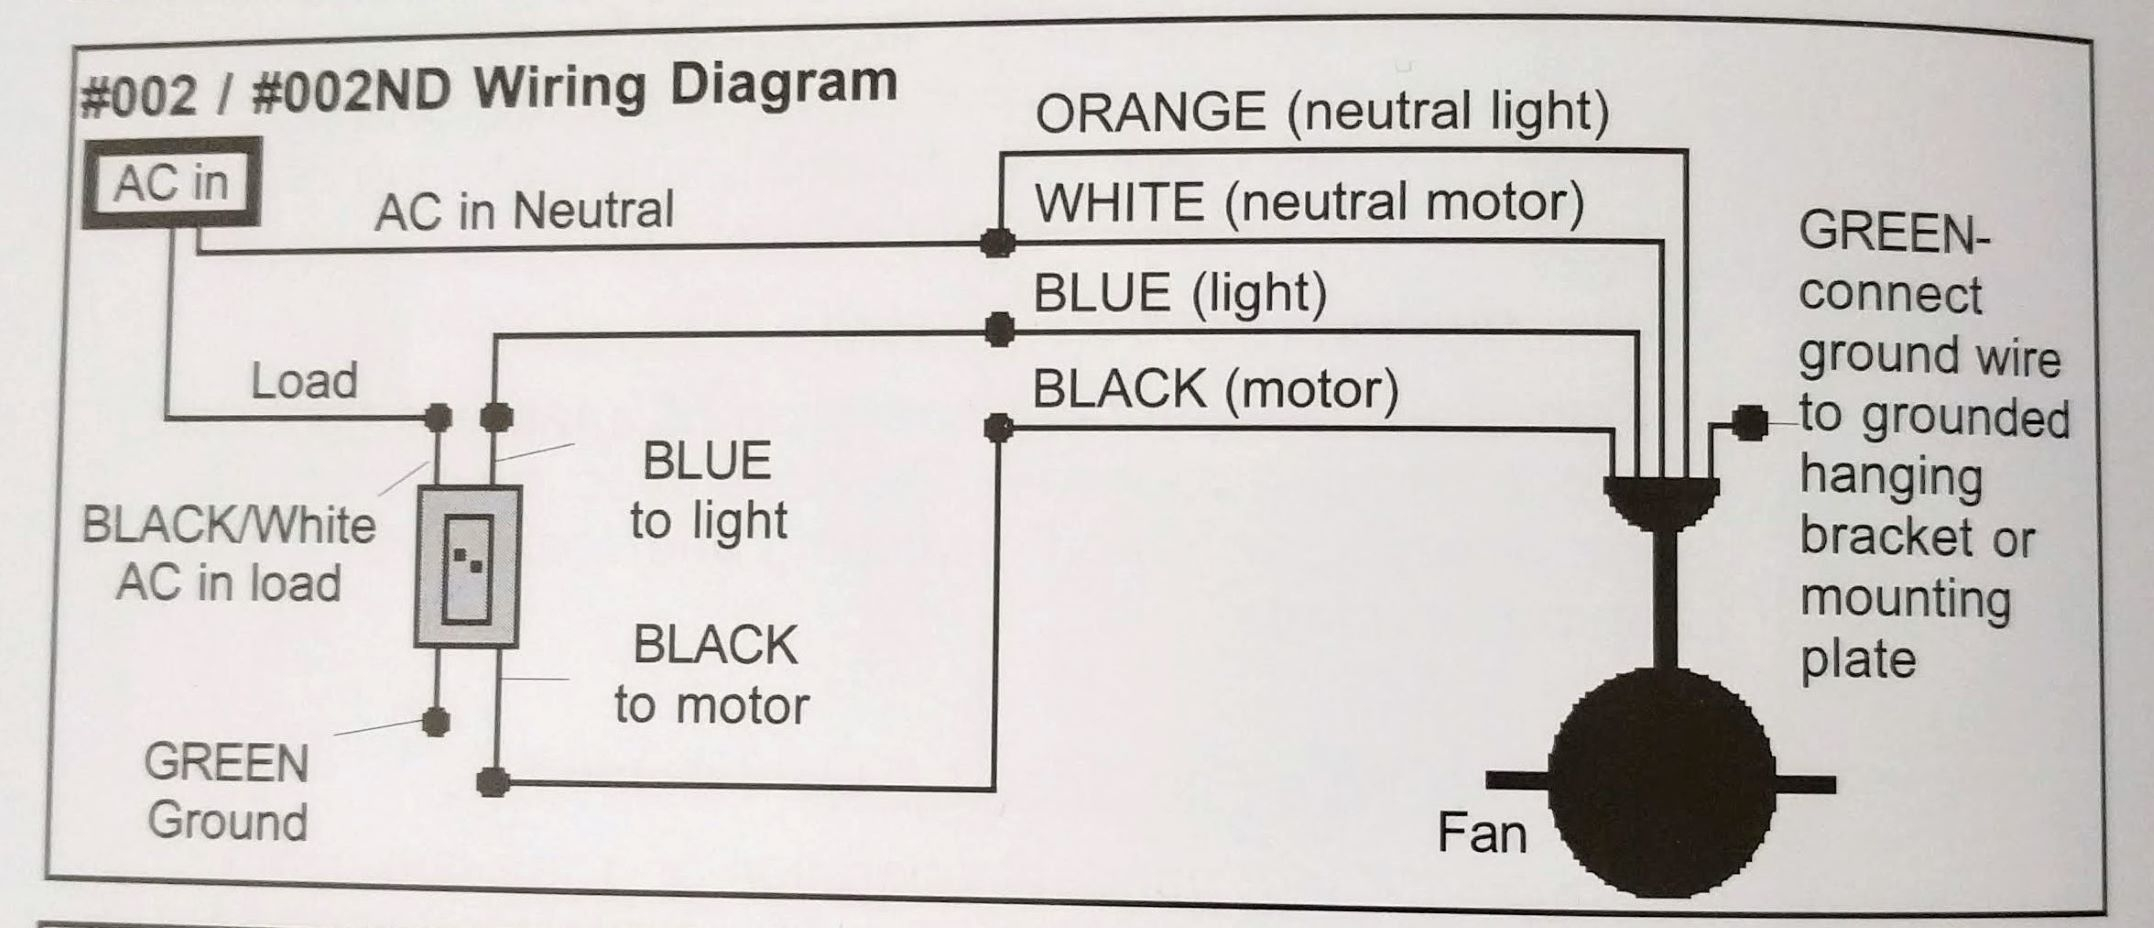 Wiring A Ceiling Fan With Black White Red Green In with sizing 2154 X 928